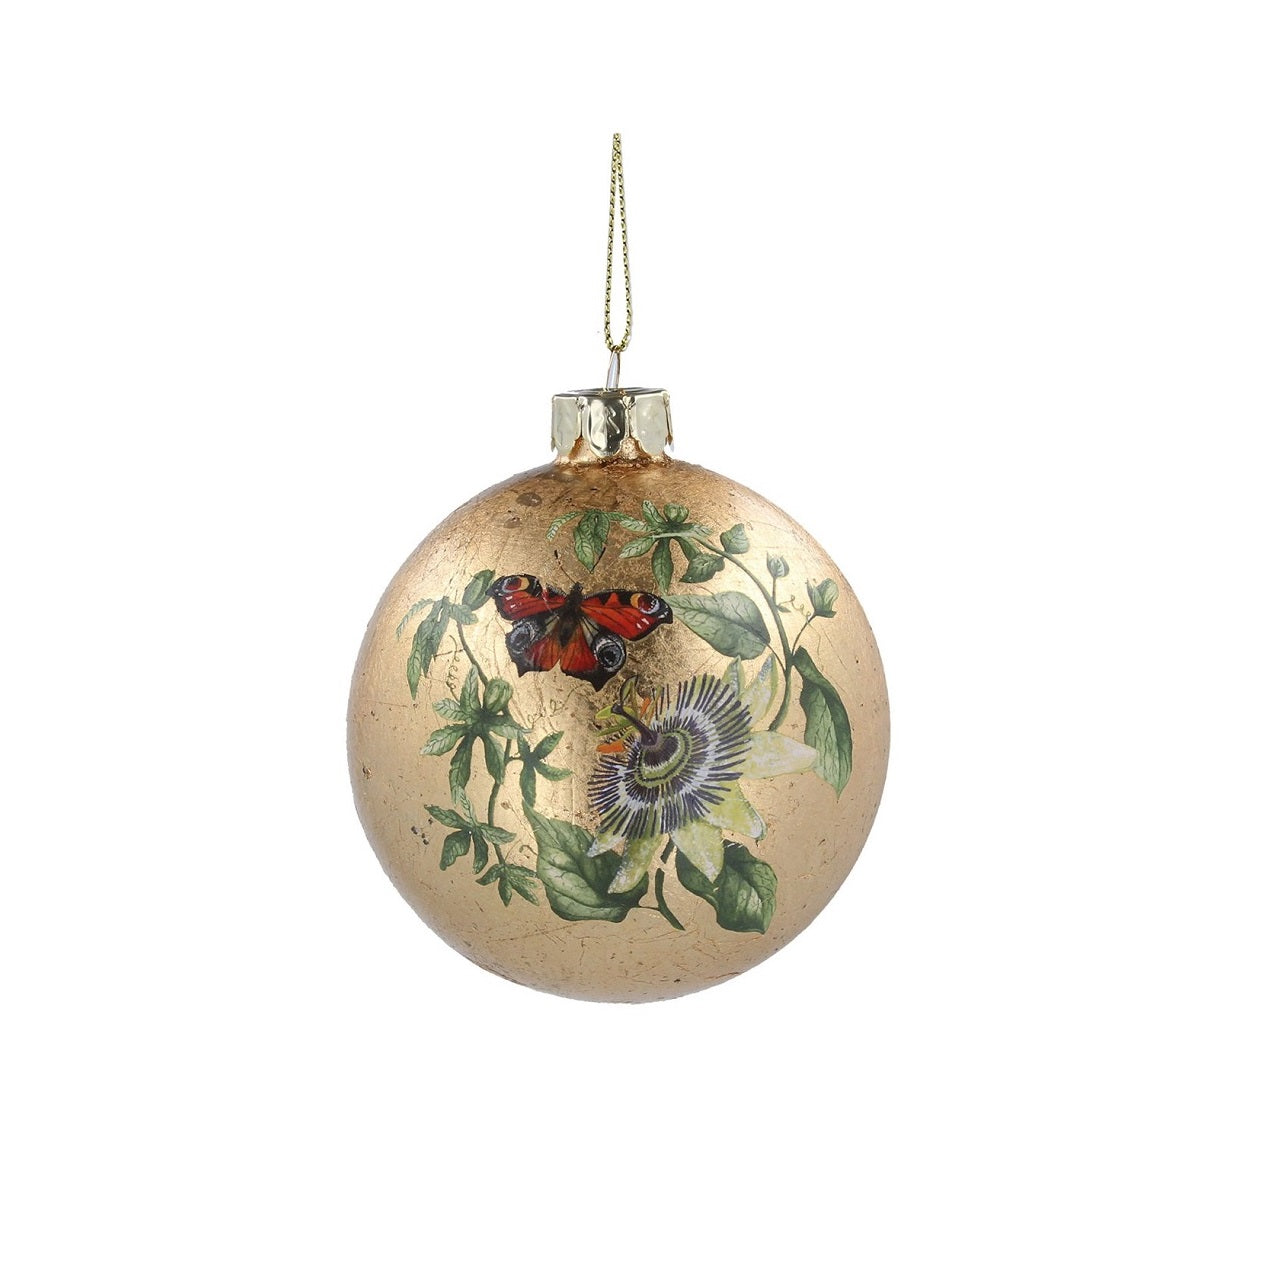 Gisela Graham Gold Glass Bauble with Butterfly Christmas Ornament - Flower  Browse our beautiful range of luxury Christmas tree decorations and ornaments for your tree this Christmas.  Add style to your Christmas tree with this beautiful gold glass bauble decorated with a butterfly and flower Christmas hanging ornament.